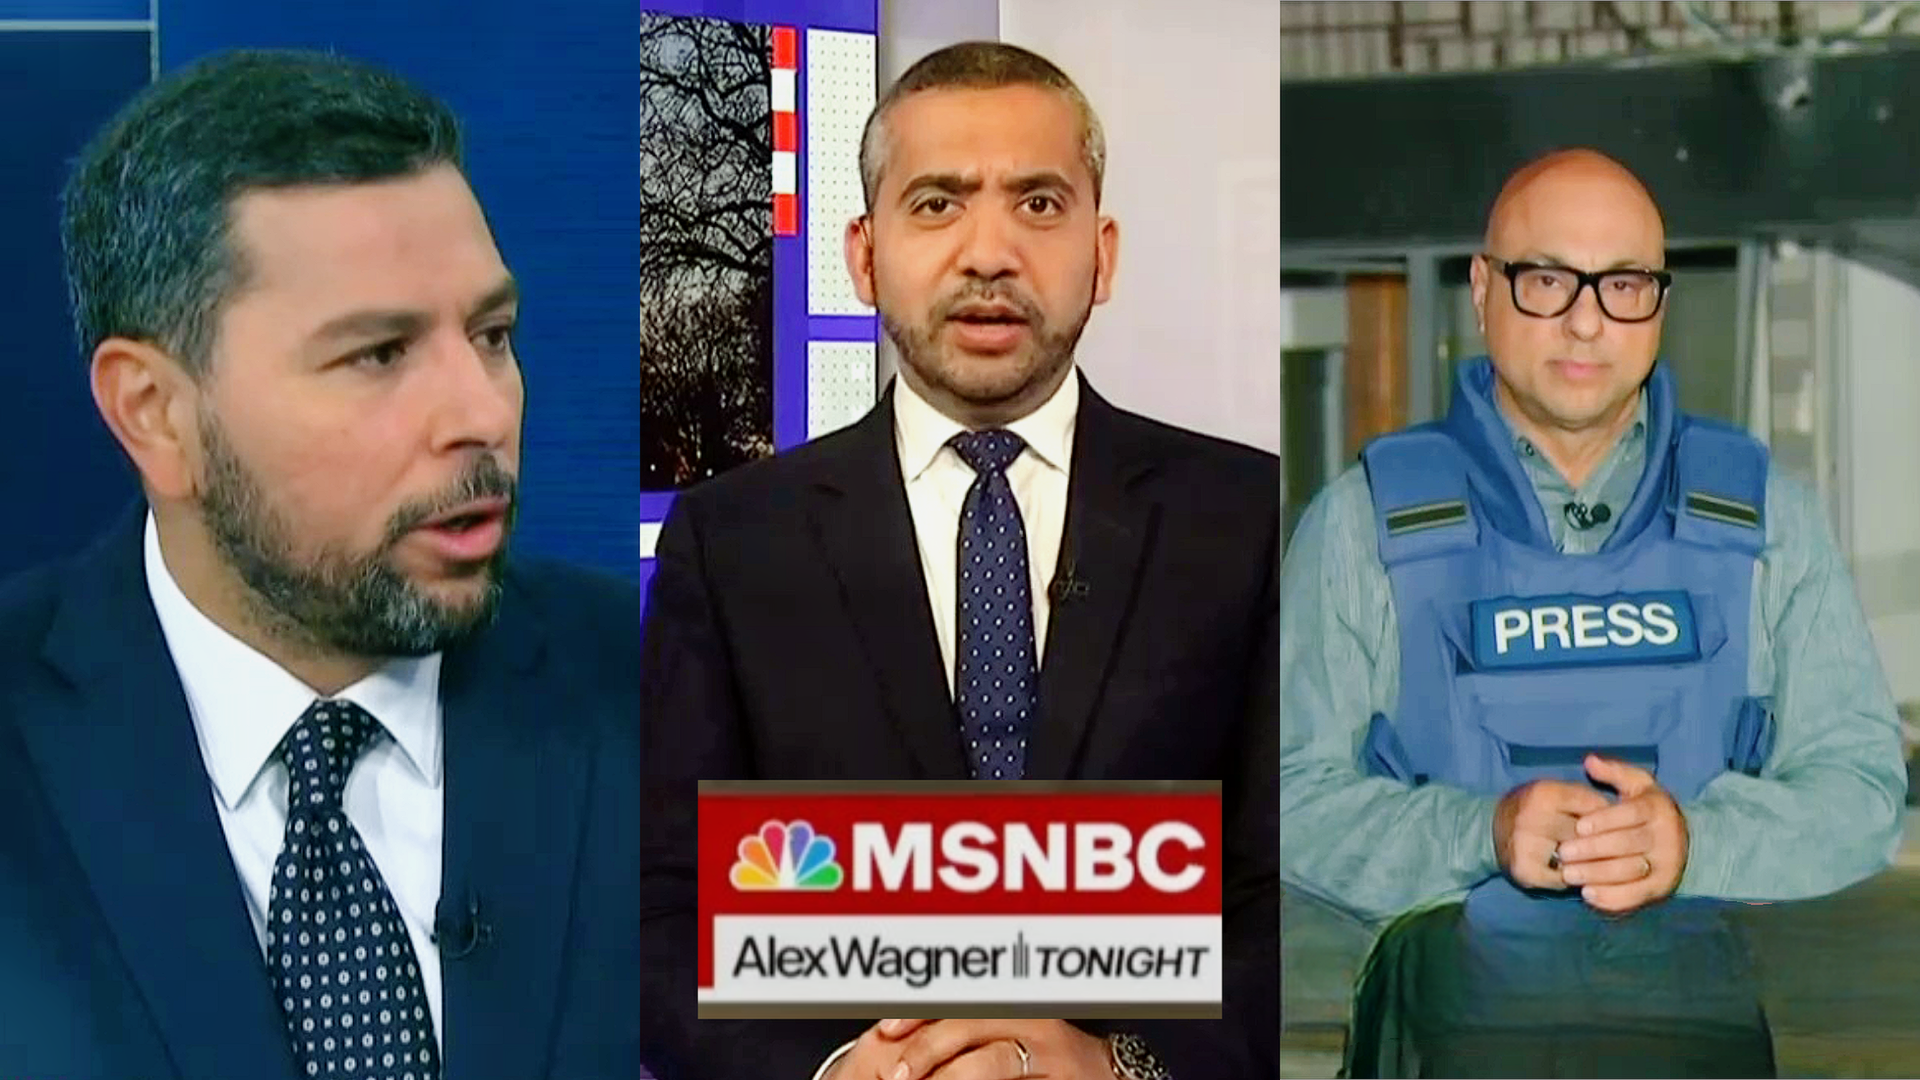 Anti-Trump Host Lashes Out Over Report MSNBC Bemched Muslim Anchors — Which MSNBC Vehemently Denies